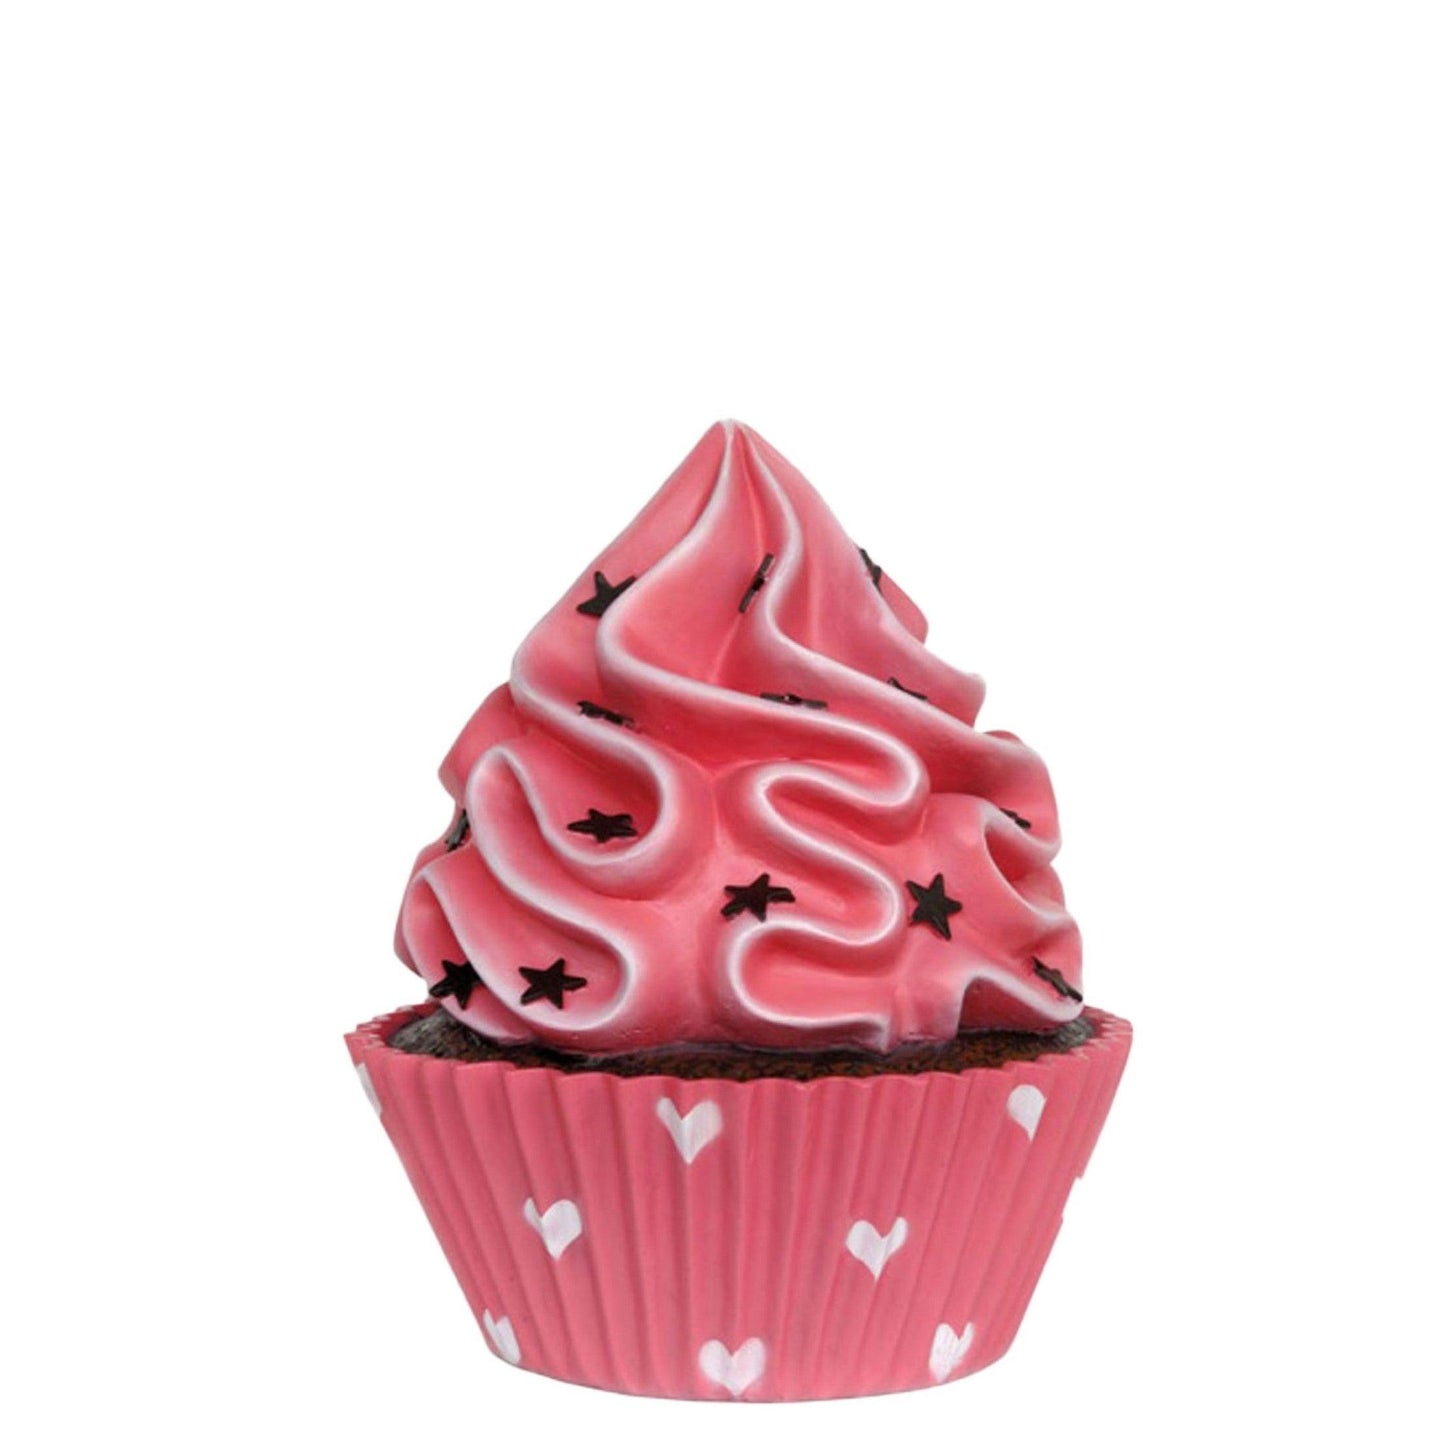 Bright Pink Cupcake With Stars Statue - LM Treasures Prop Rentals 